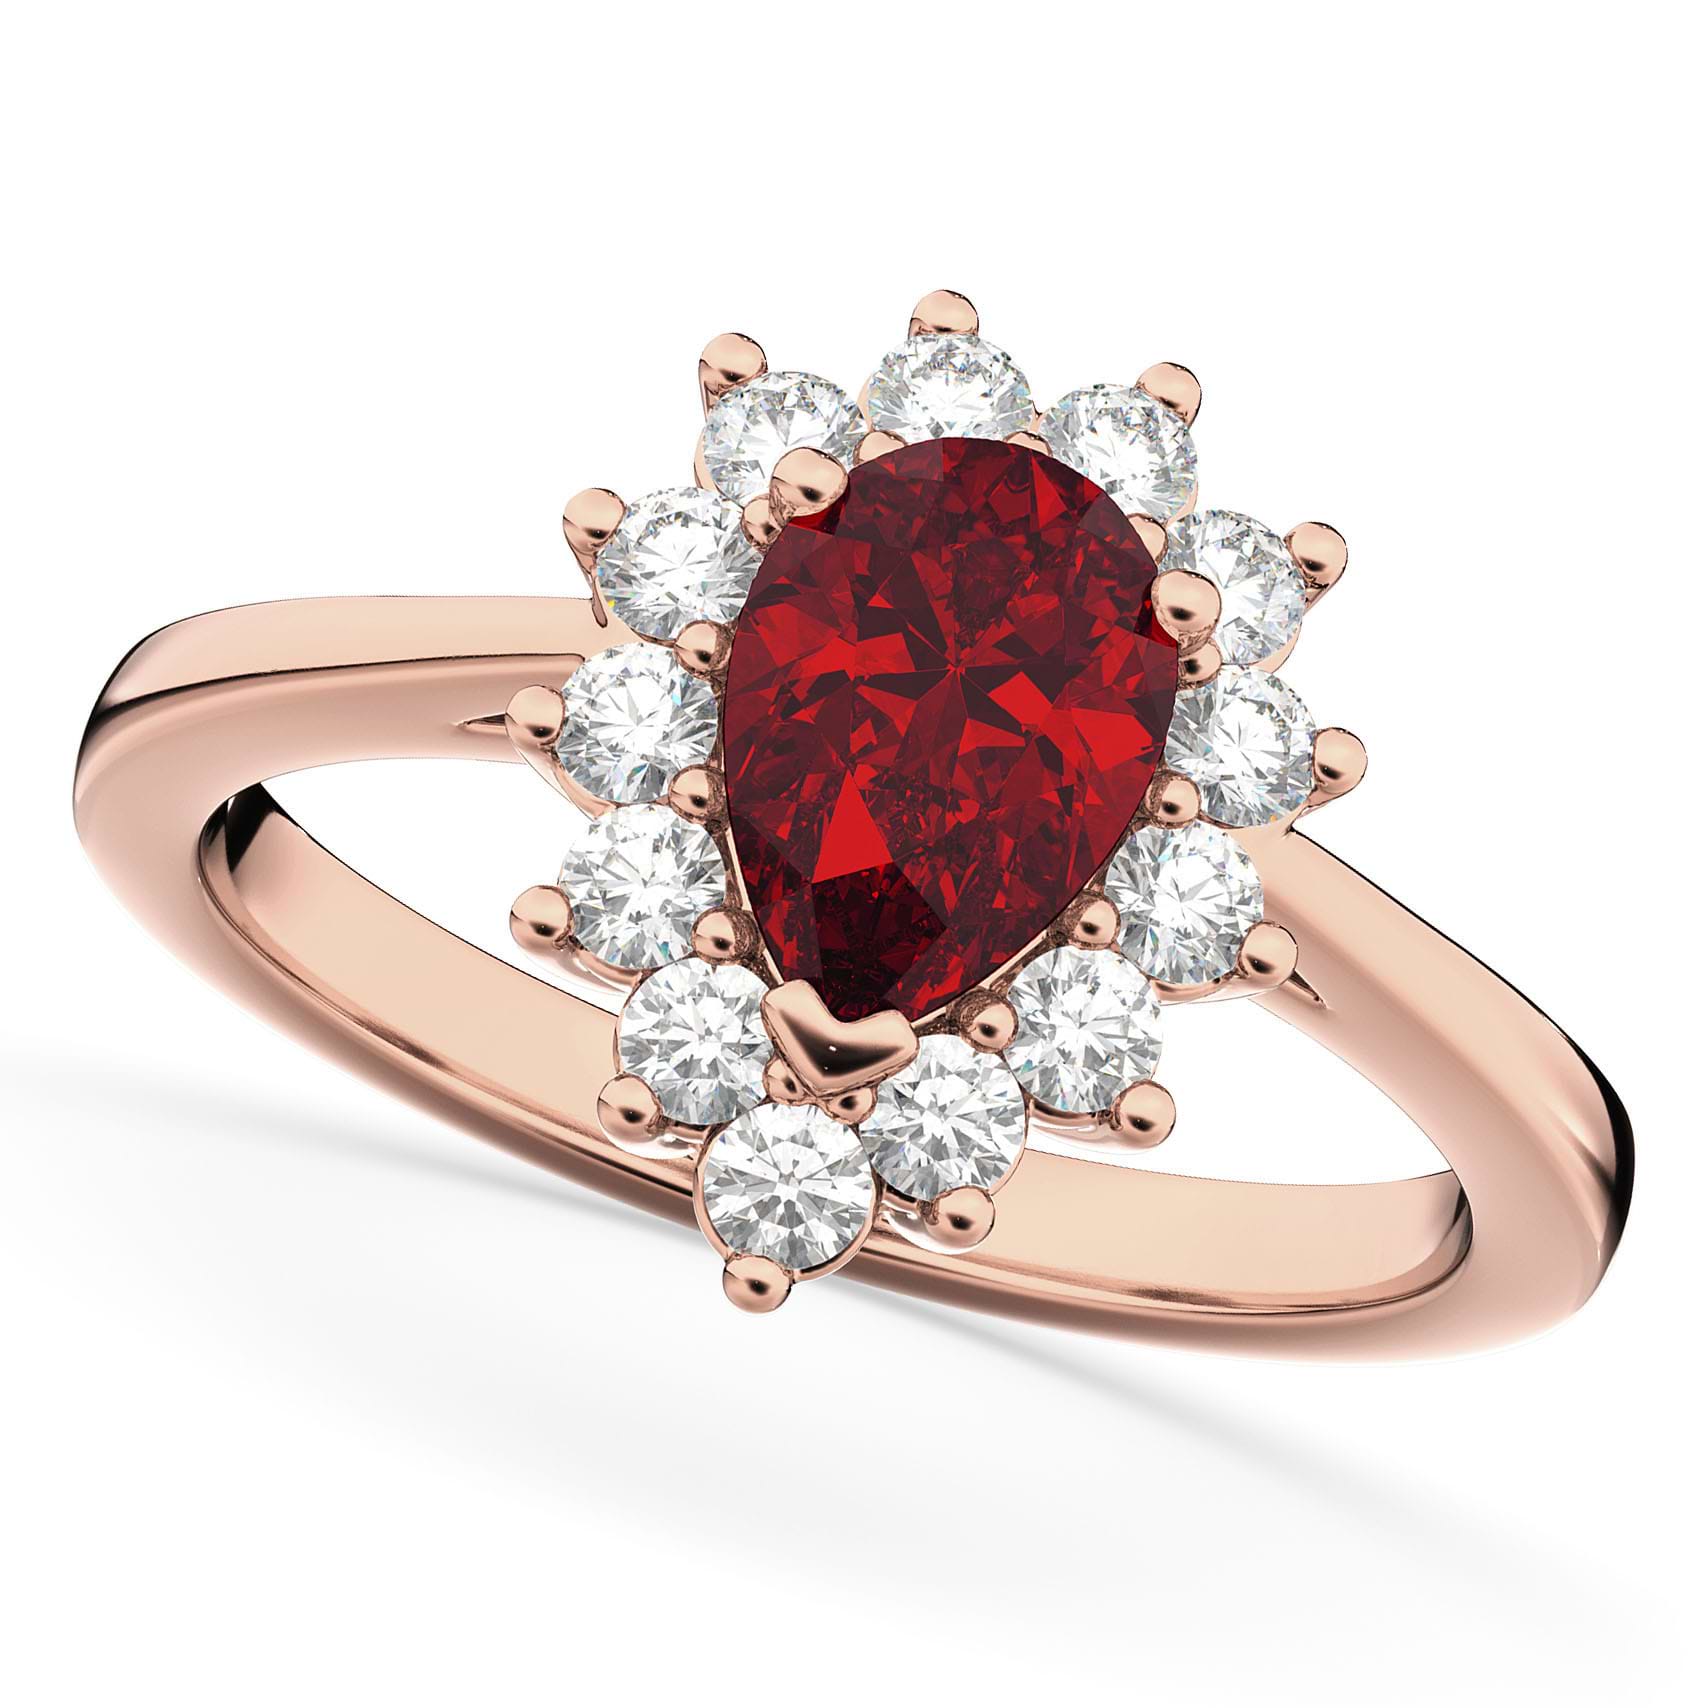 Halo Ruby & Diamond Floral Pear Shaped Fashion Ring 14k Rose Gold (1.27ct)